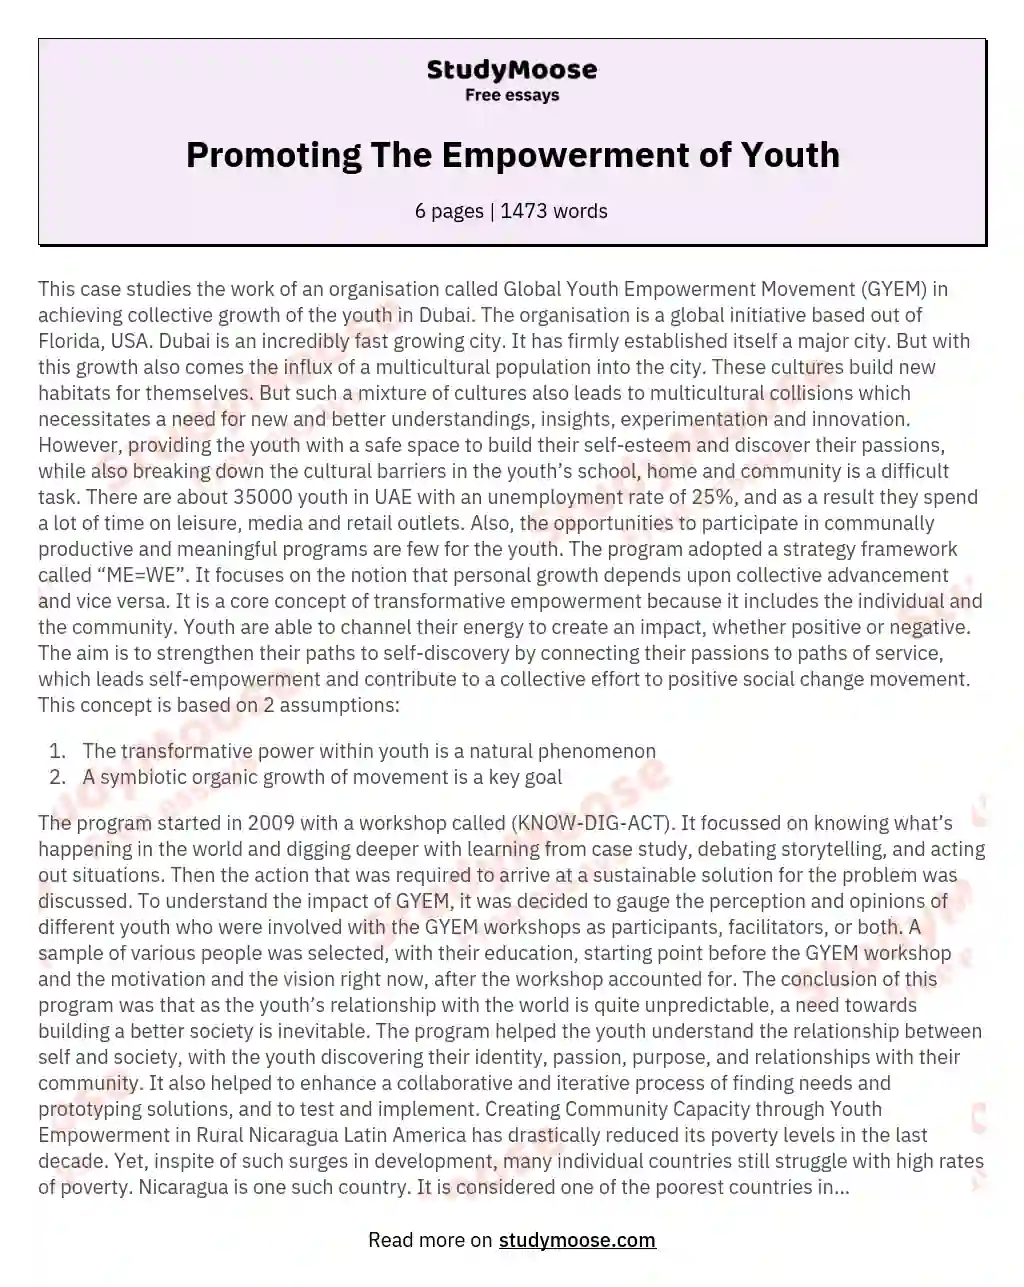 essay about youth empowerment